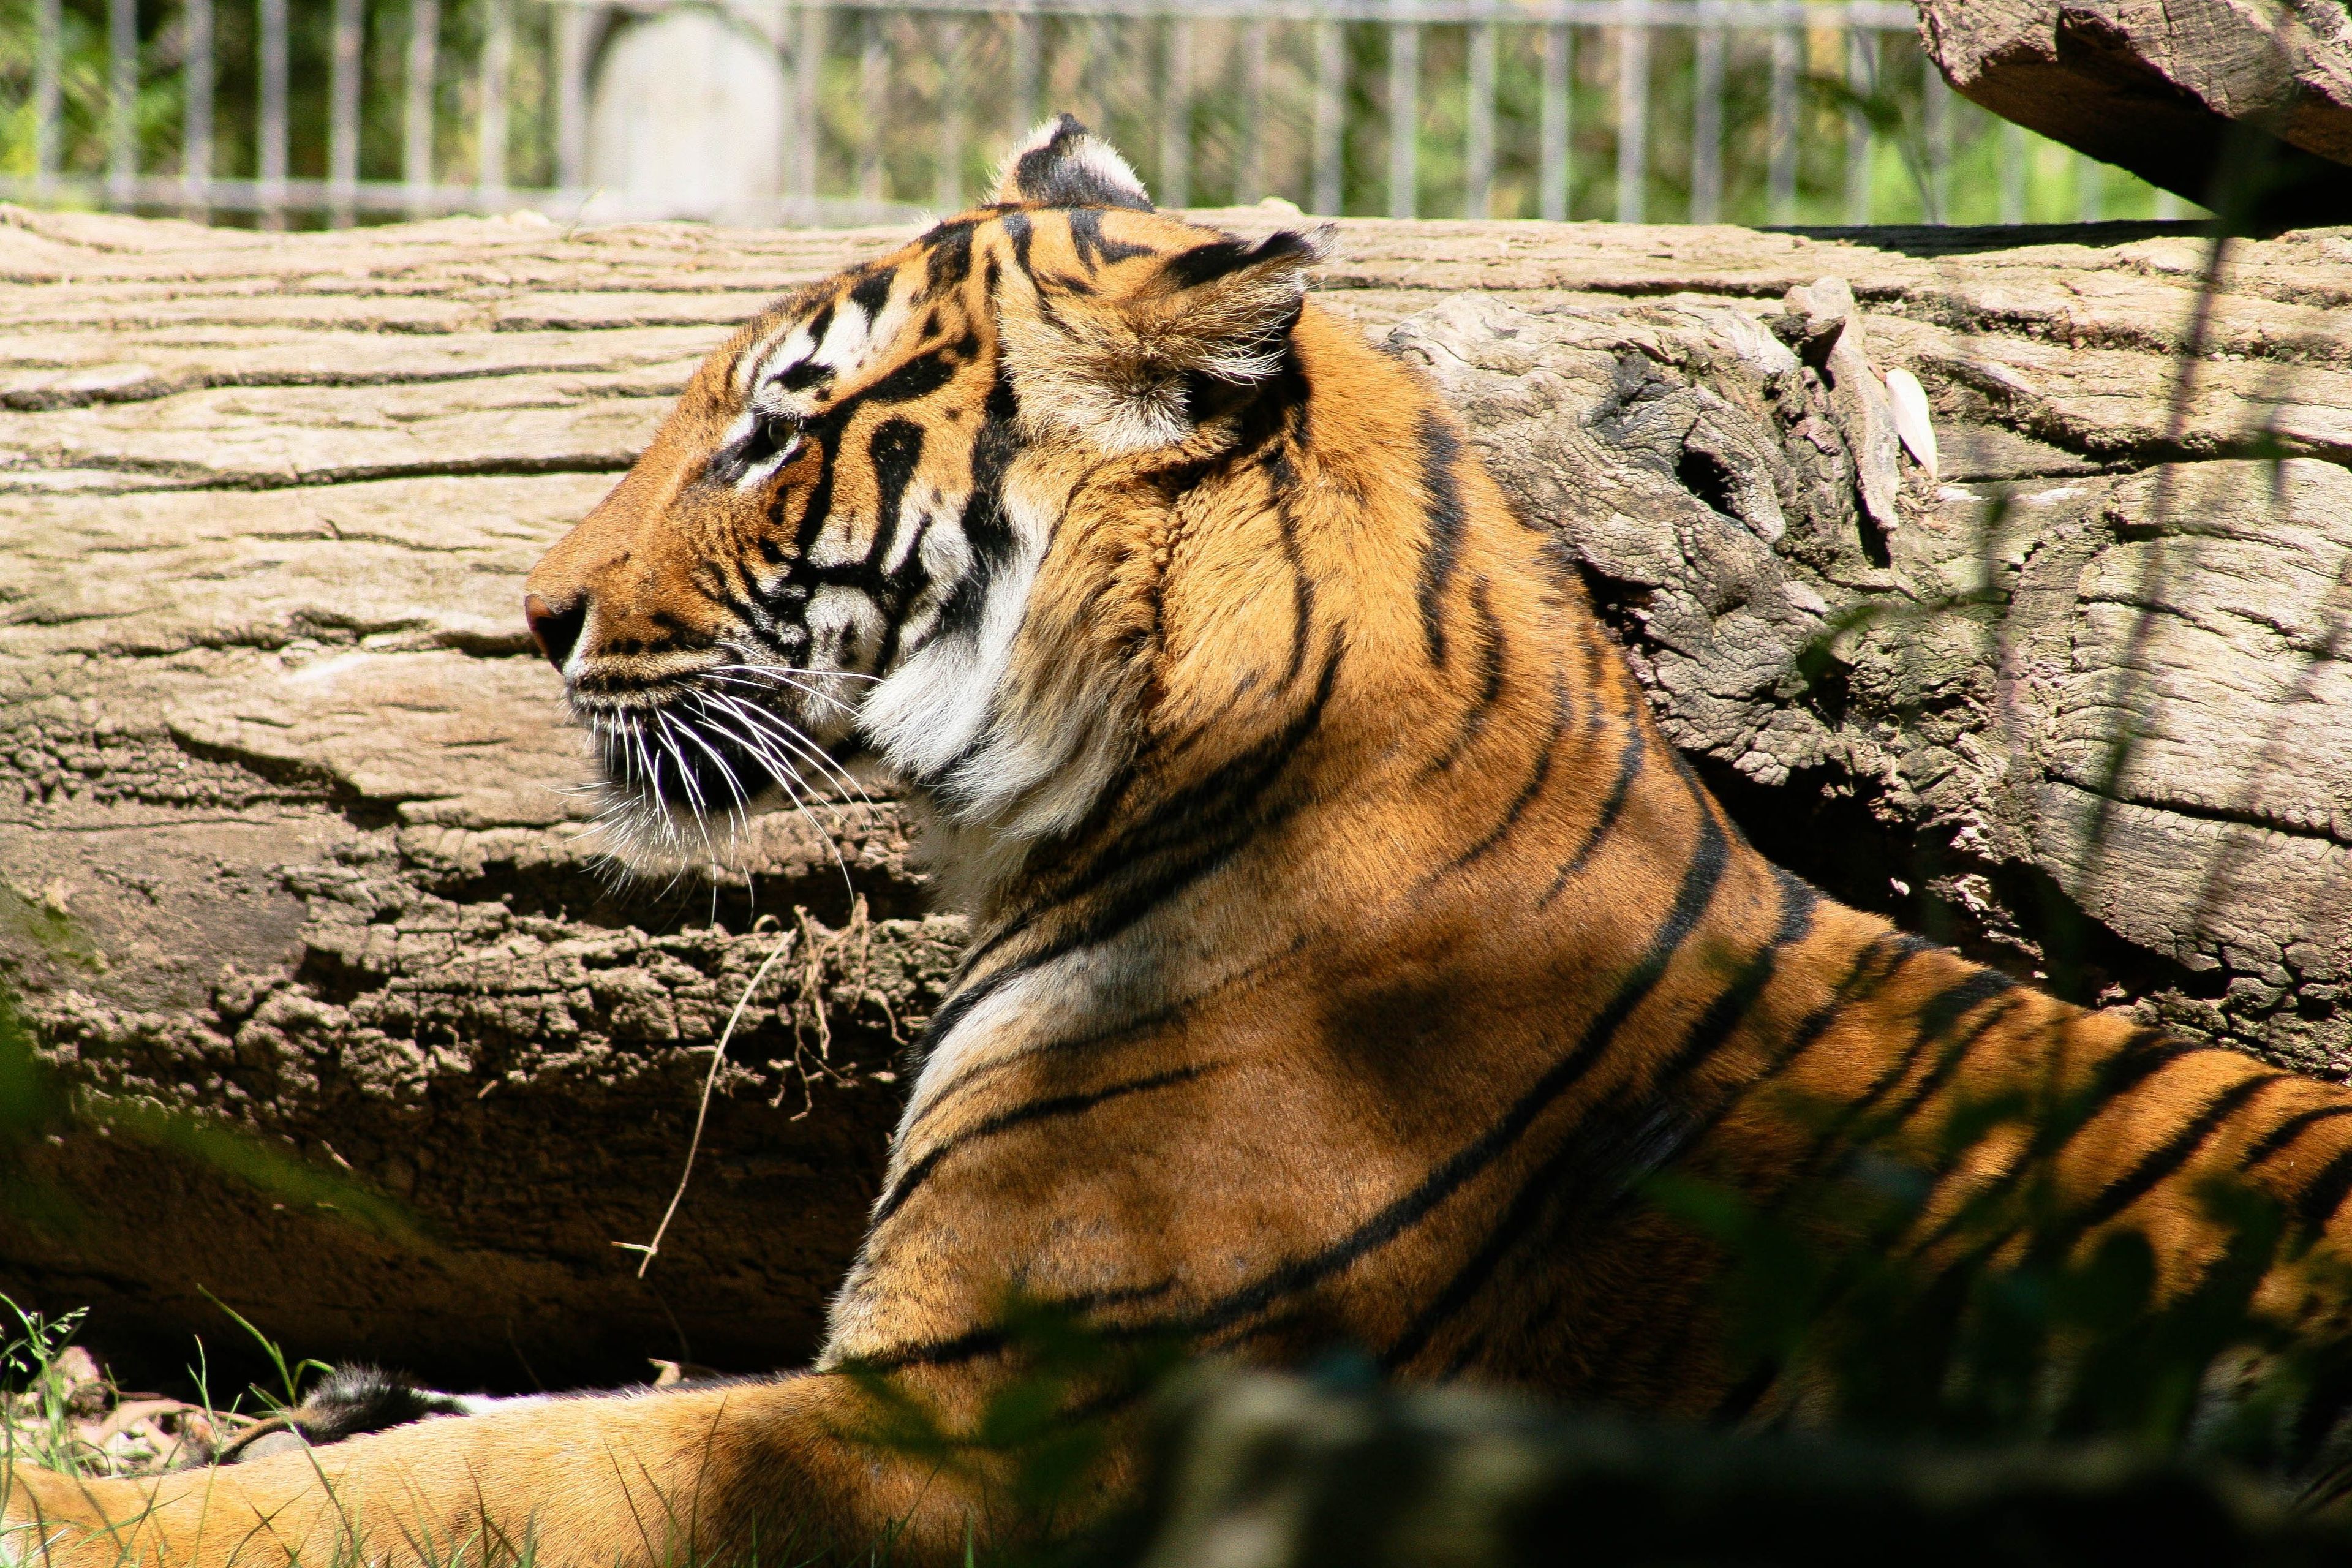 A large tiger lying down.